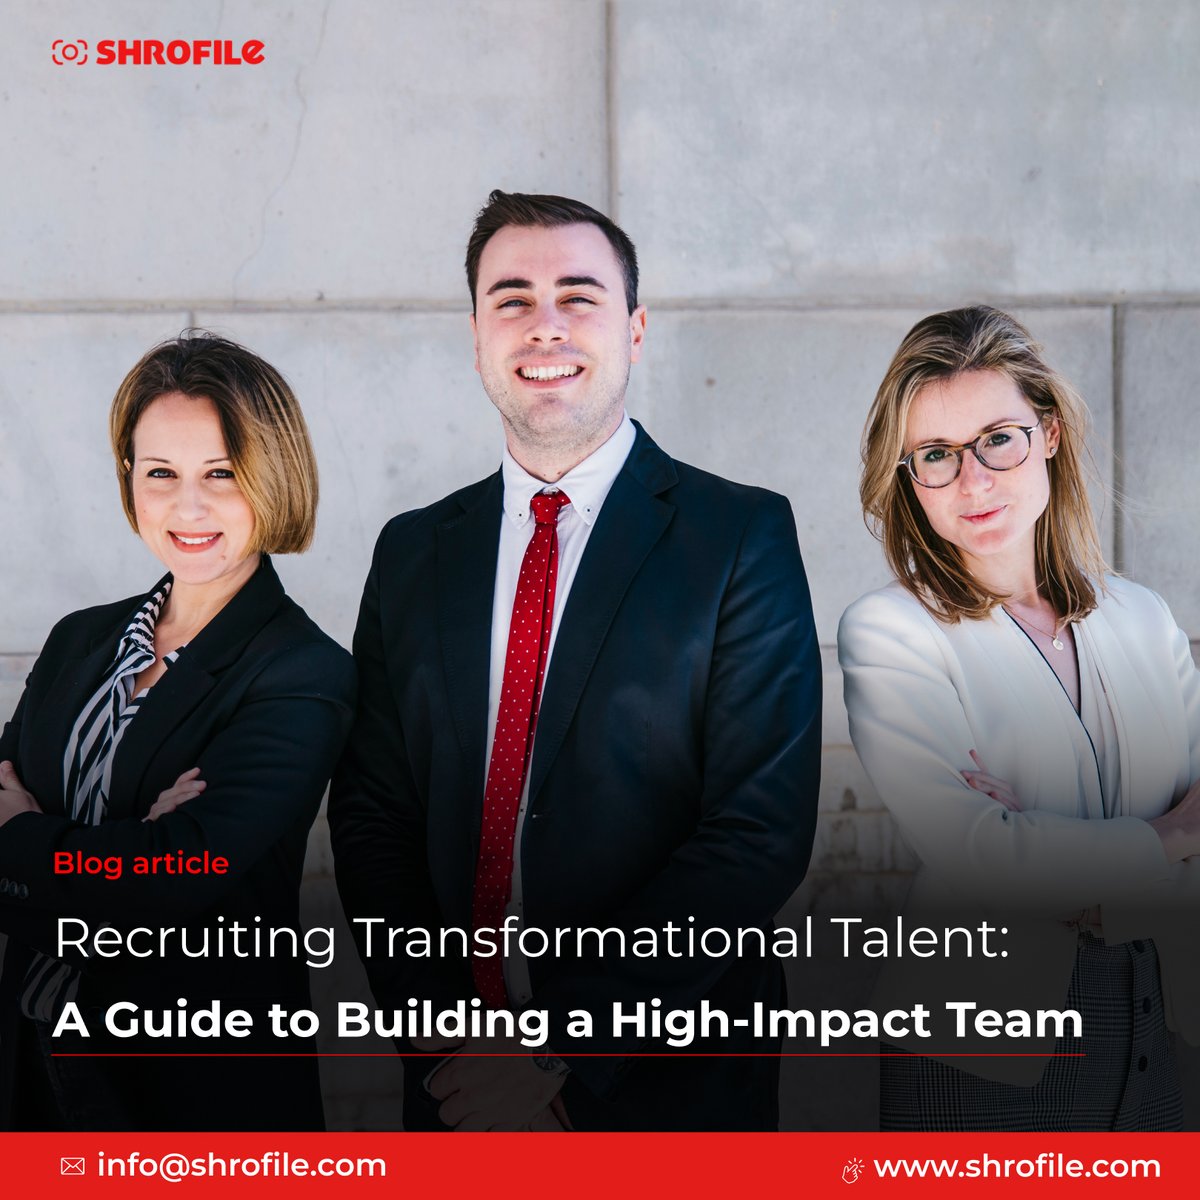 🚀 Don't just fill positions – build a team that drives innovation and leads change

Read more: shrofile.com/blog/recruitin…
Contact info@shrofile.com to learn more about attracting and retaining top-tier talent for your organization.

#TopTalent #RecruitmentTips #HRStrategy